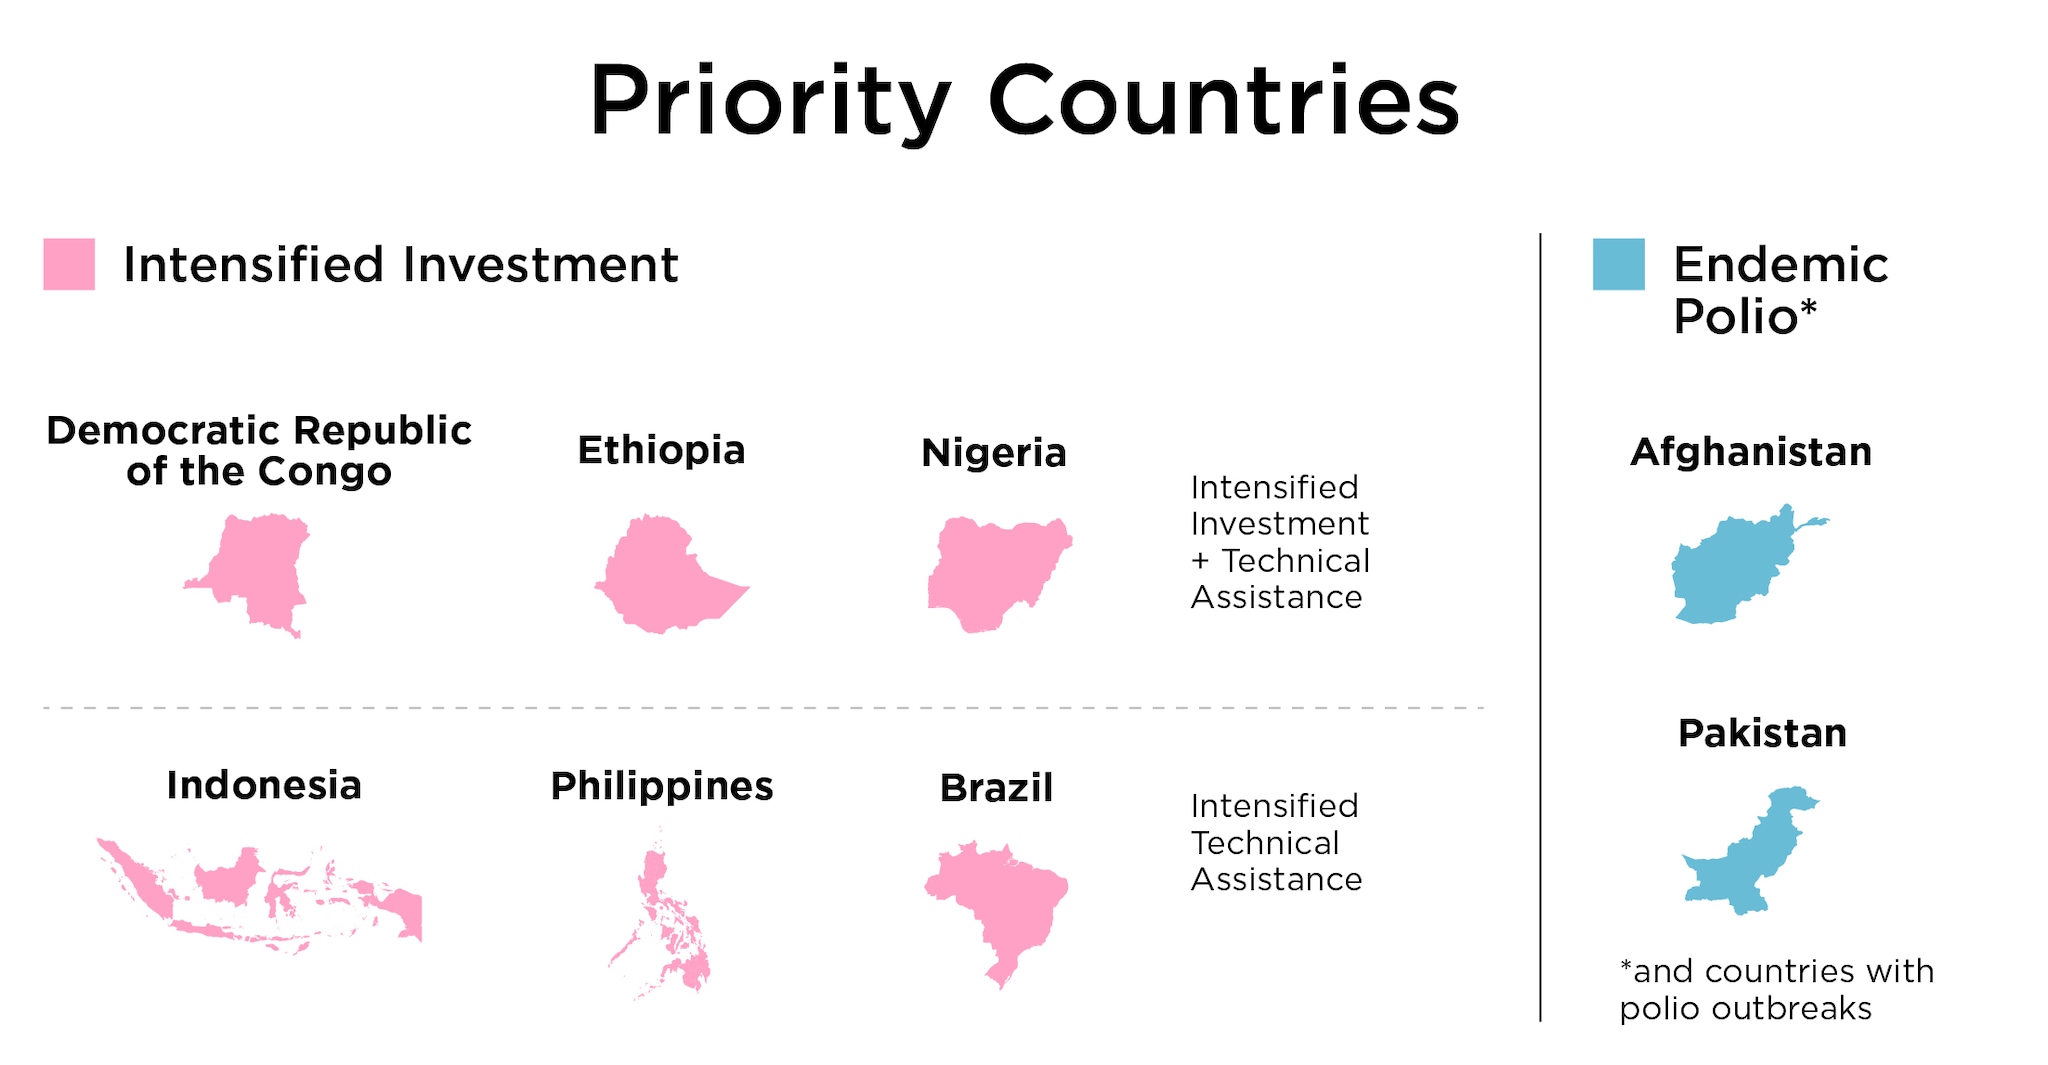 Priority countries for polio: Intensified Investment - Brazil, DRC, Ethiopia, Indonesia, Nigeria, Philippines. Endemic Polio - Afghanistan and Pakistan (with focus on outbreak countries).